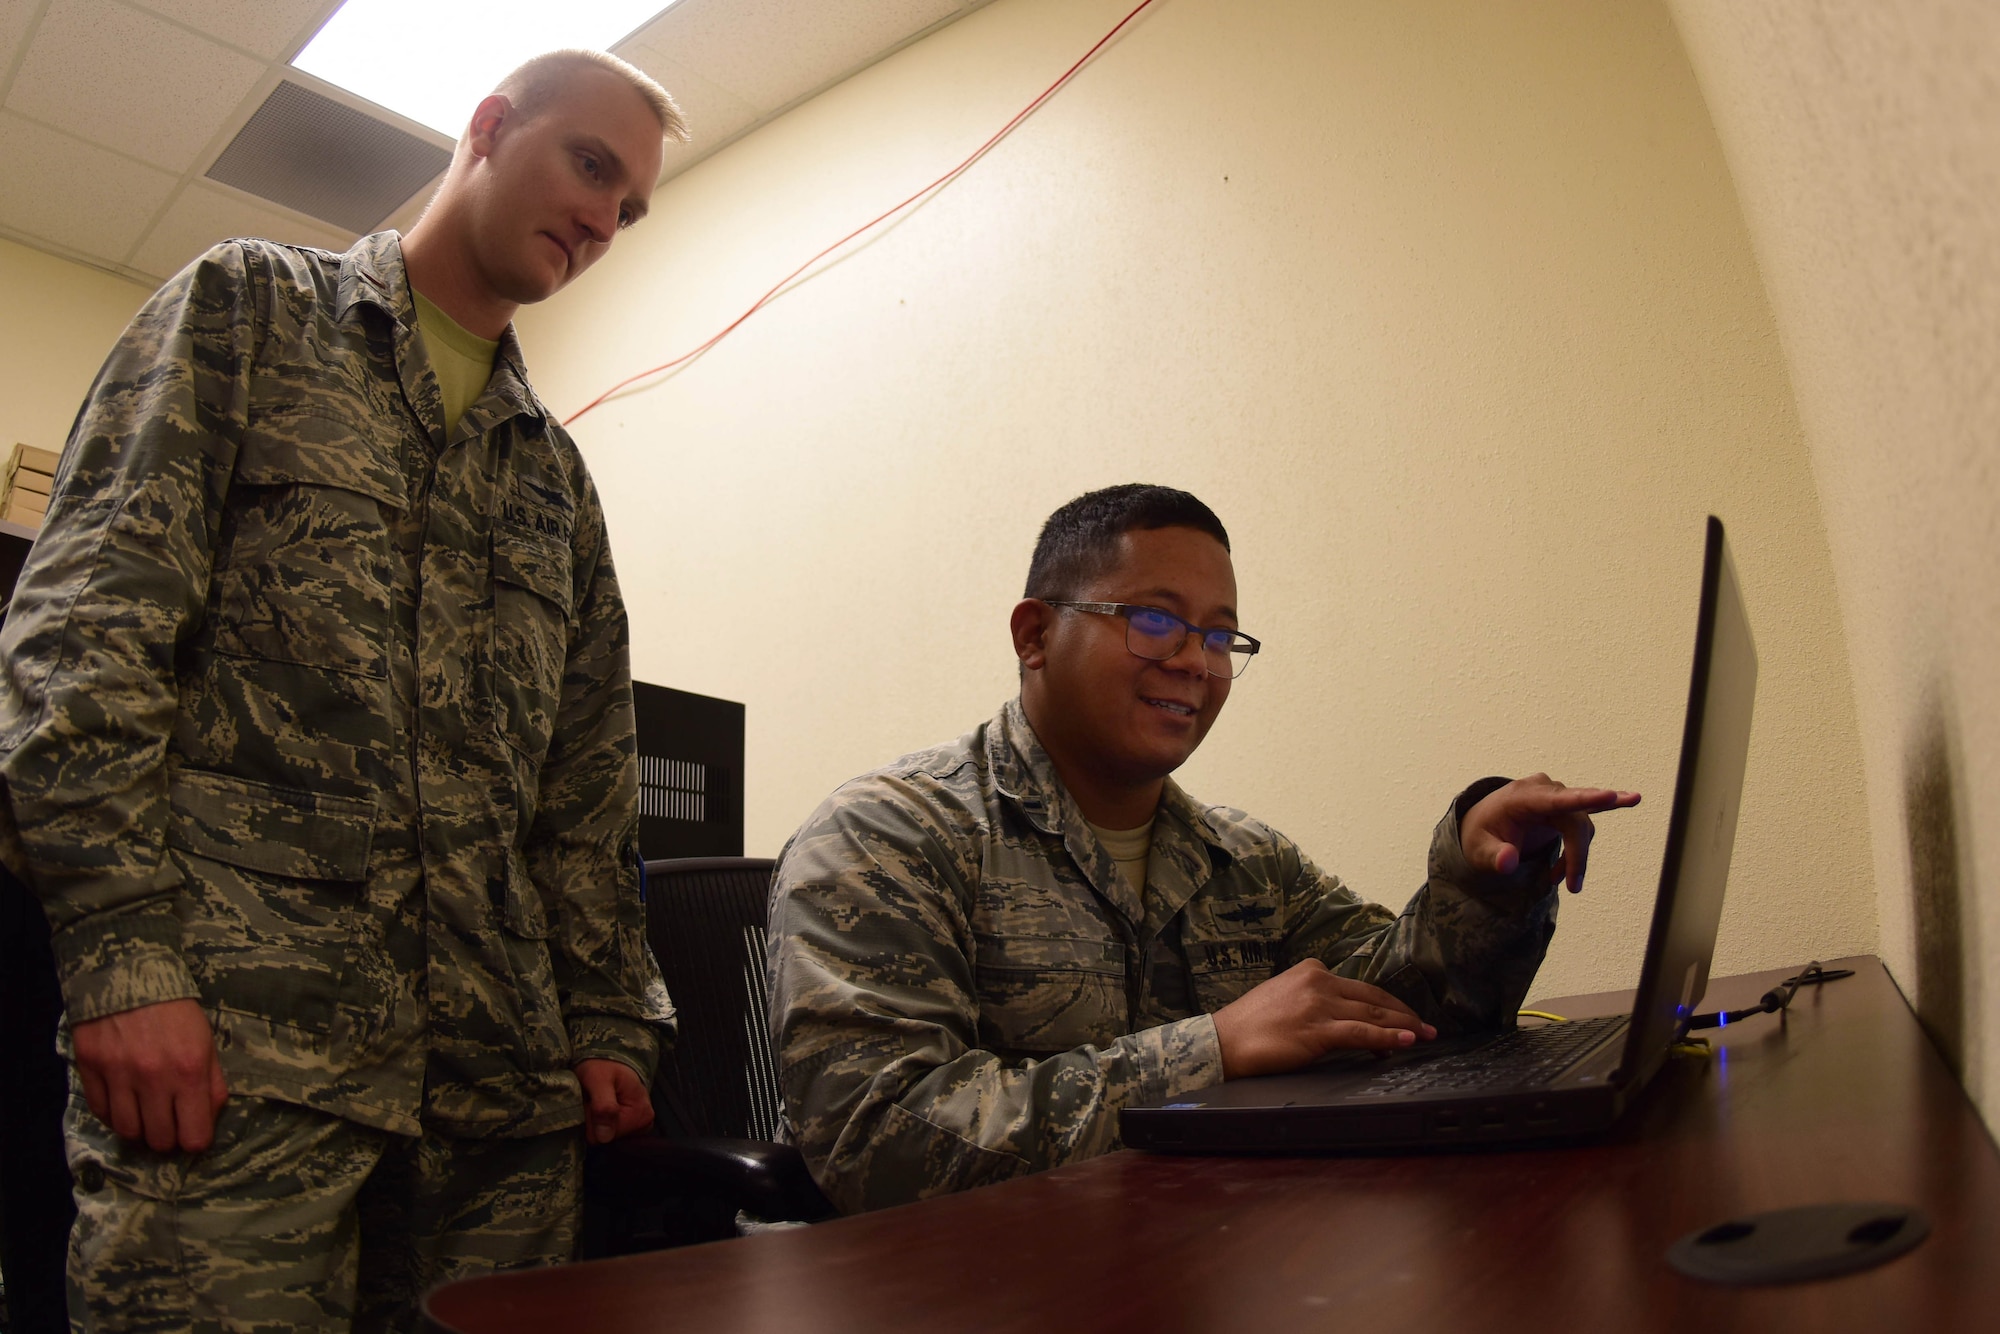 1st Lt. Vaughn, 432nd Aircraft Communications Maintenance Squadron Mission Defense Team officer in charge, and 2nd Lt. Eric, 432nd ACMS MDT Assistant officer in charge, go over computer code at Creech Air Force Base, Nevada, April 29, 2019. The 432nd Wing’s MDT is tasked with assuring the integrity of the MQ-9 Reaper’s cyber networks and protecting the support equipment that connect the aircraft to the cockpits on the ground. (U.S. Air Force photo by Airman 1st Class Haley Stevens)